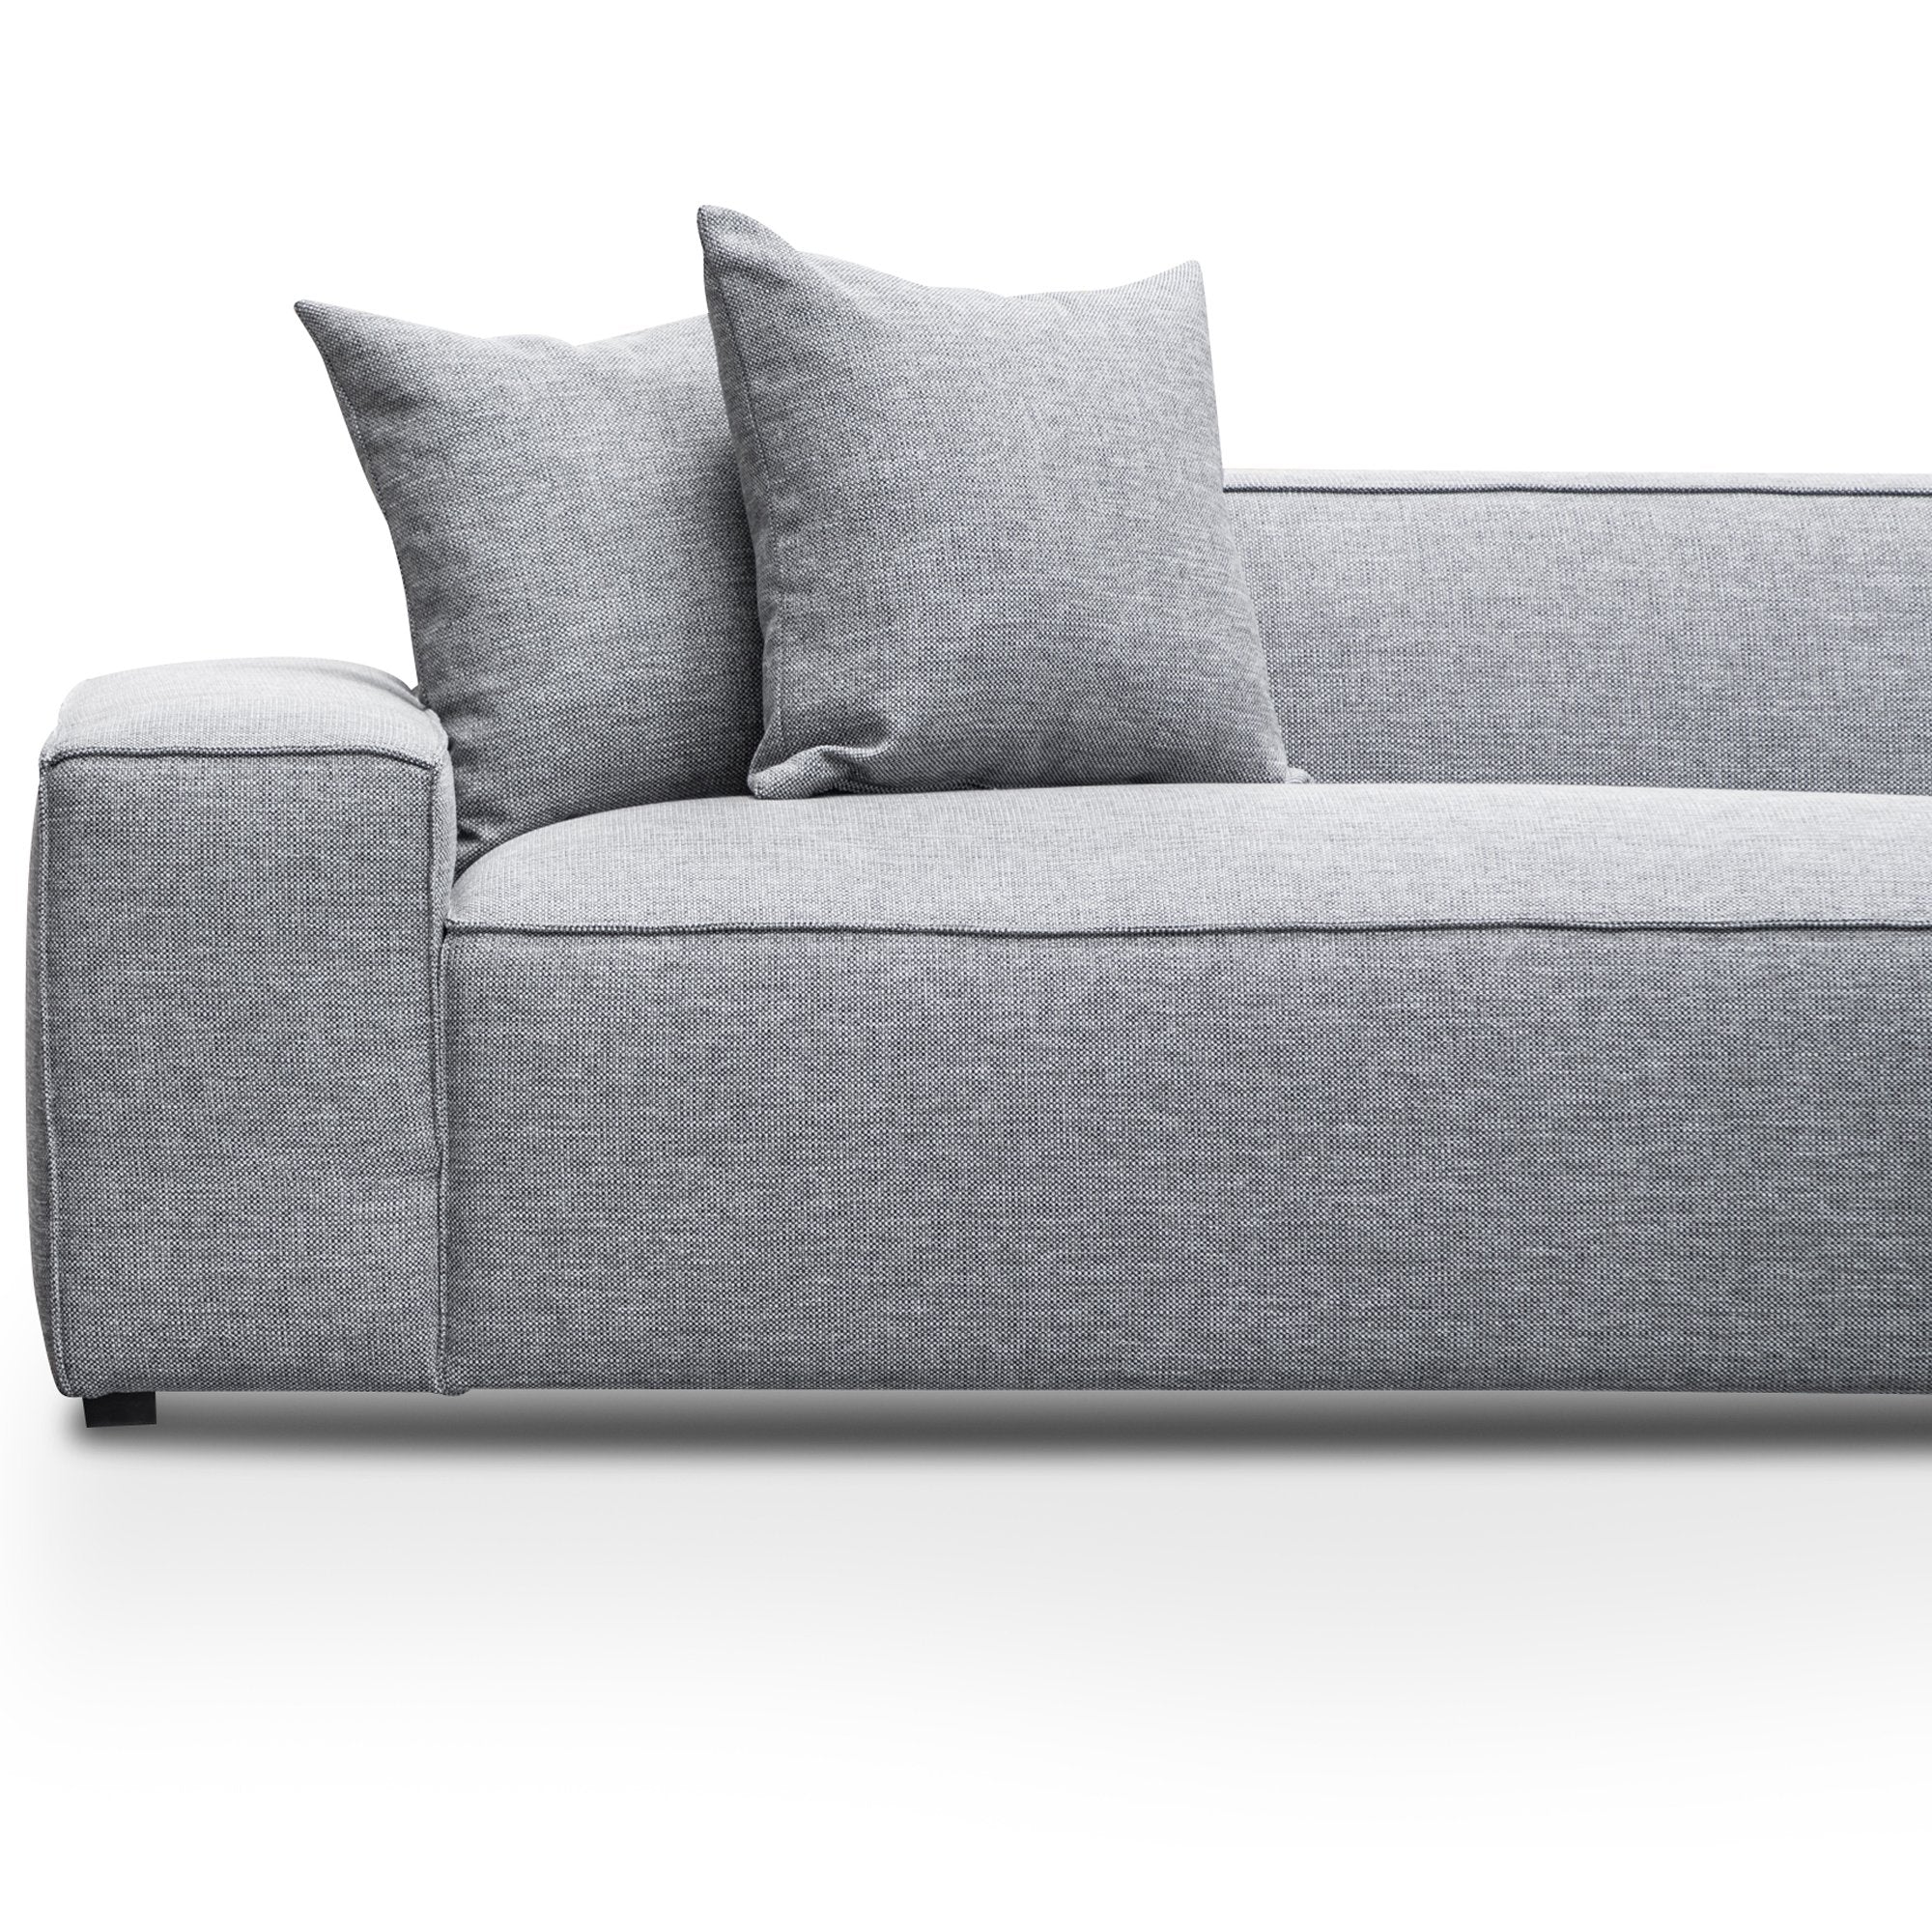 Charles 3S Right Chaise Sofa - Coin Grey - Sofas